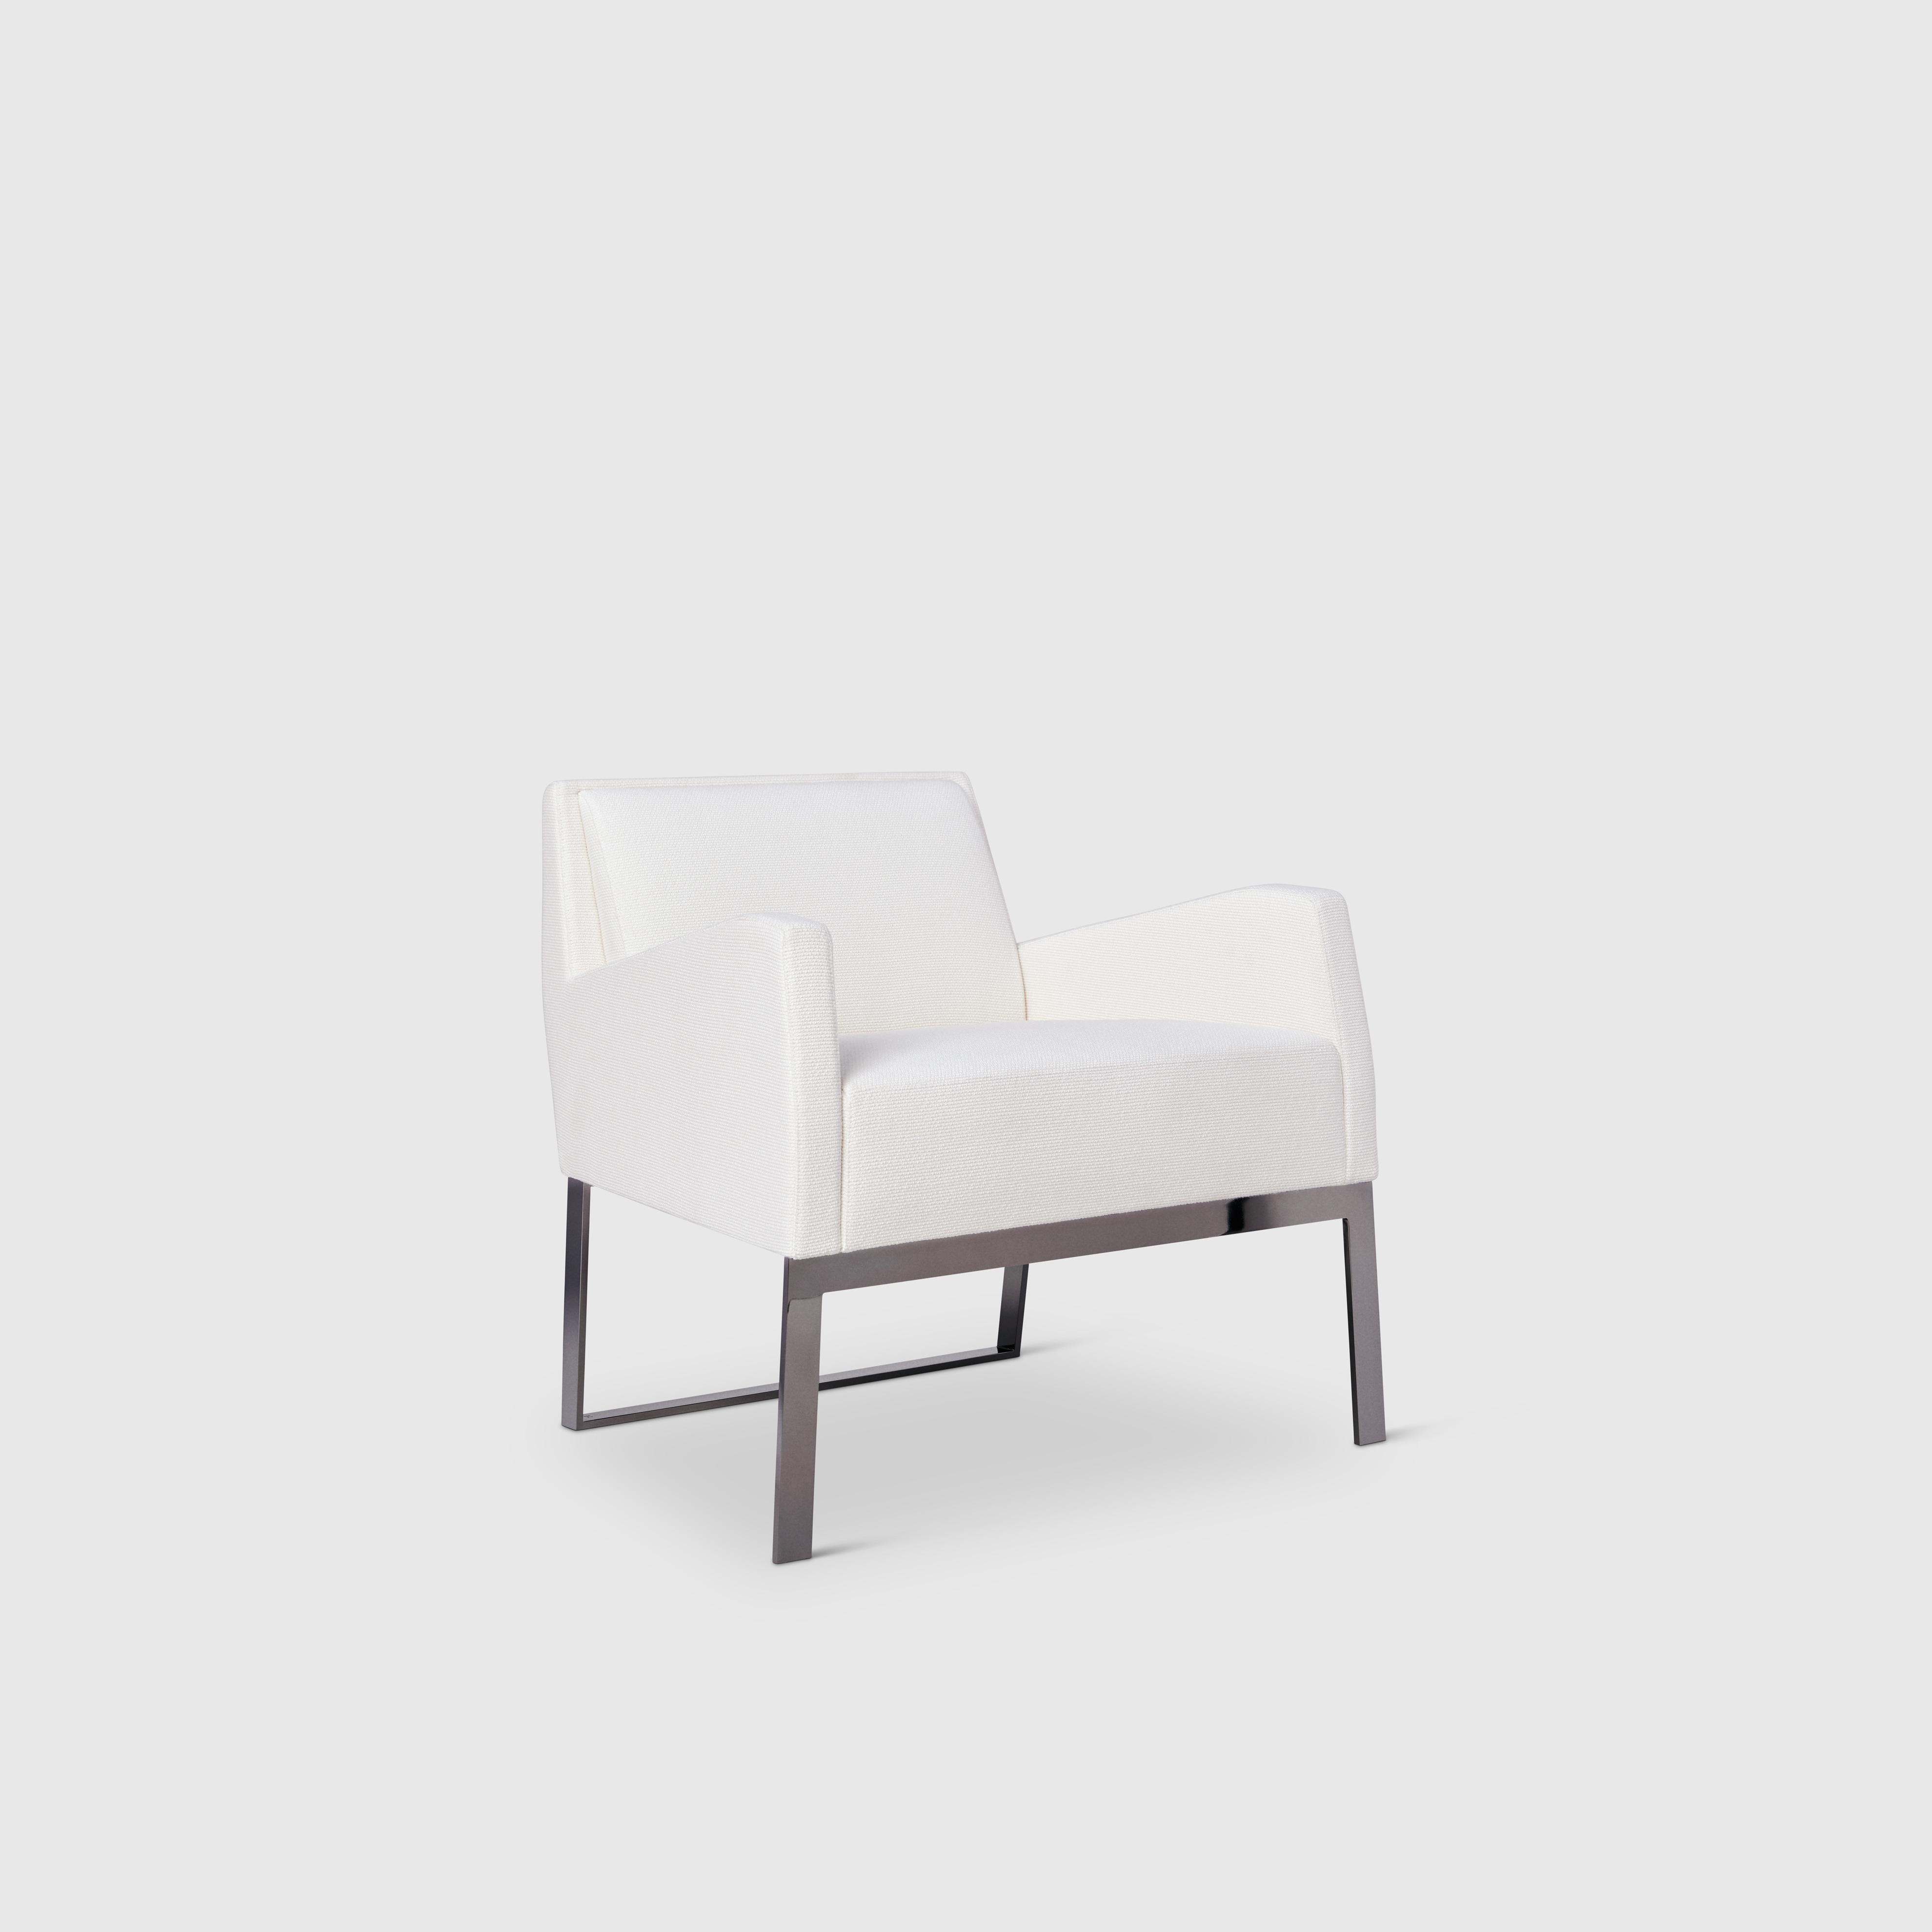 Yabu Pushelberg have cut the Fleet Street lounge chair with sharp lines. Crafted in Italy the tailored chair is available upholstered with tufted channels or without in fabric or leather and is paired with a polished black nickel finish